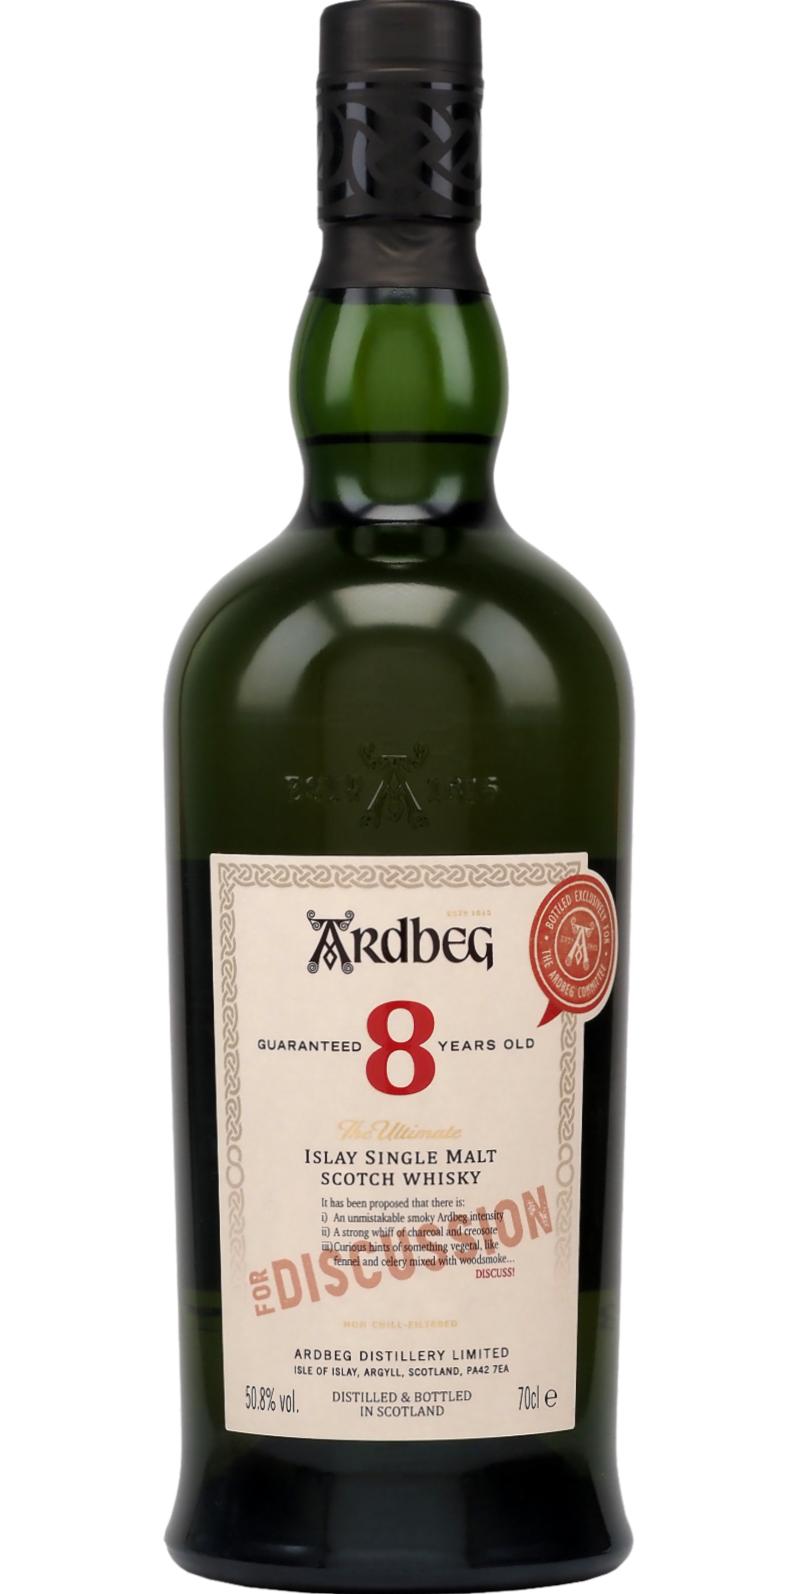 ARDBEG 8 YEARS OLD FOR DISCUSSION